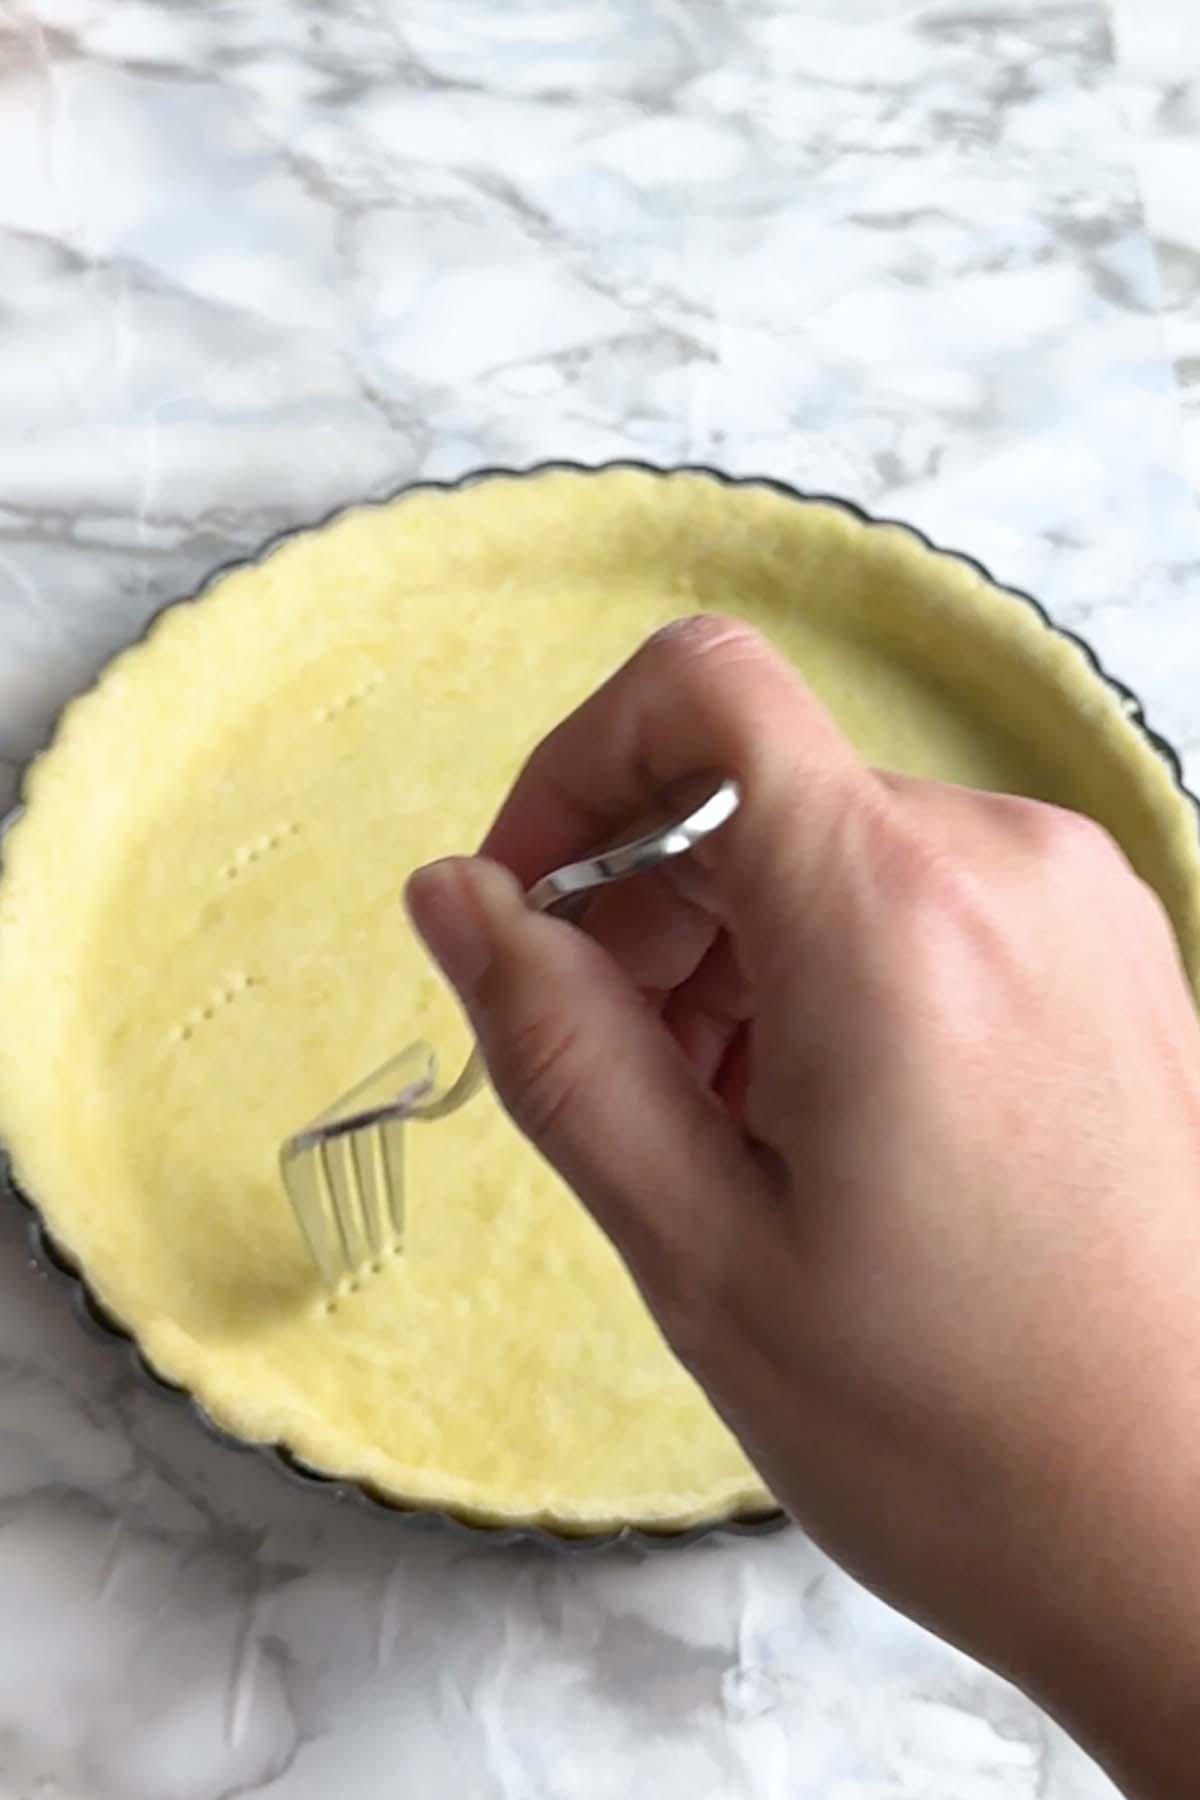 Pie dough is poked with a fork.